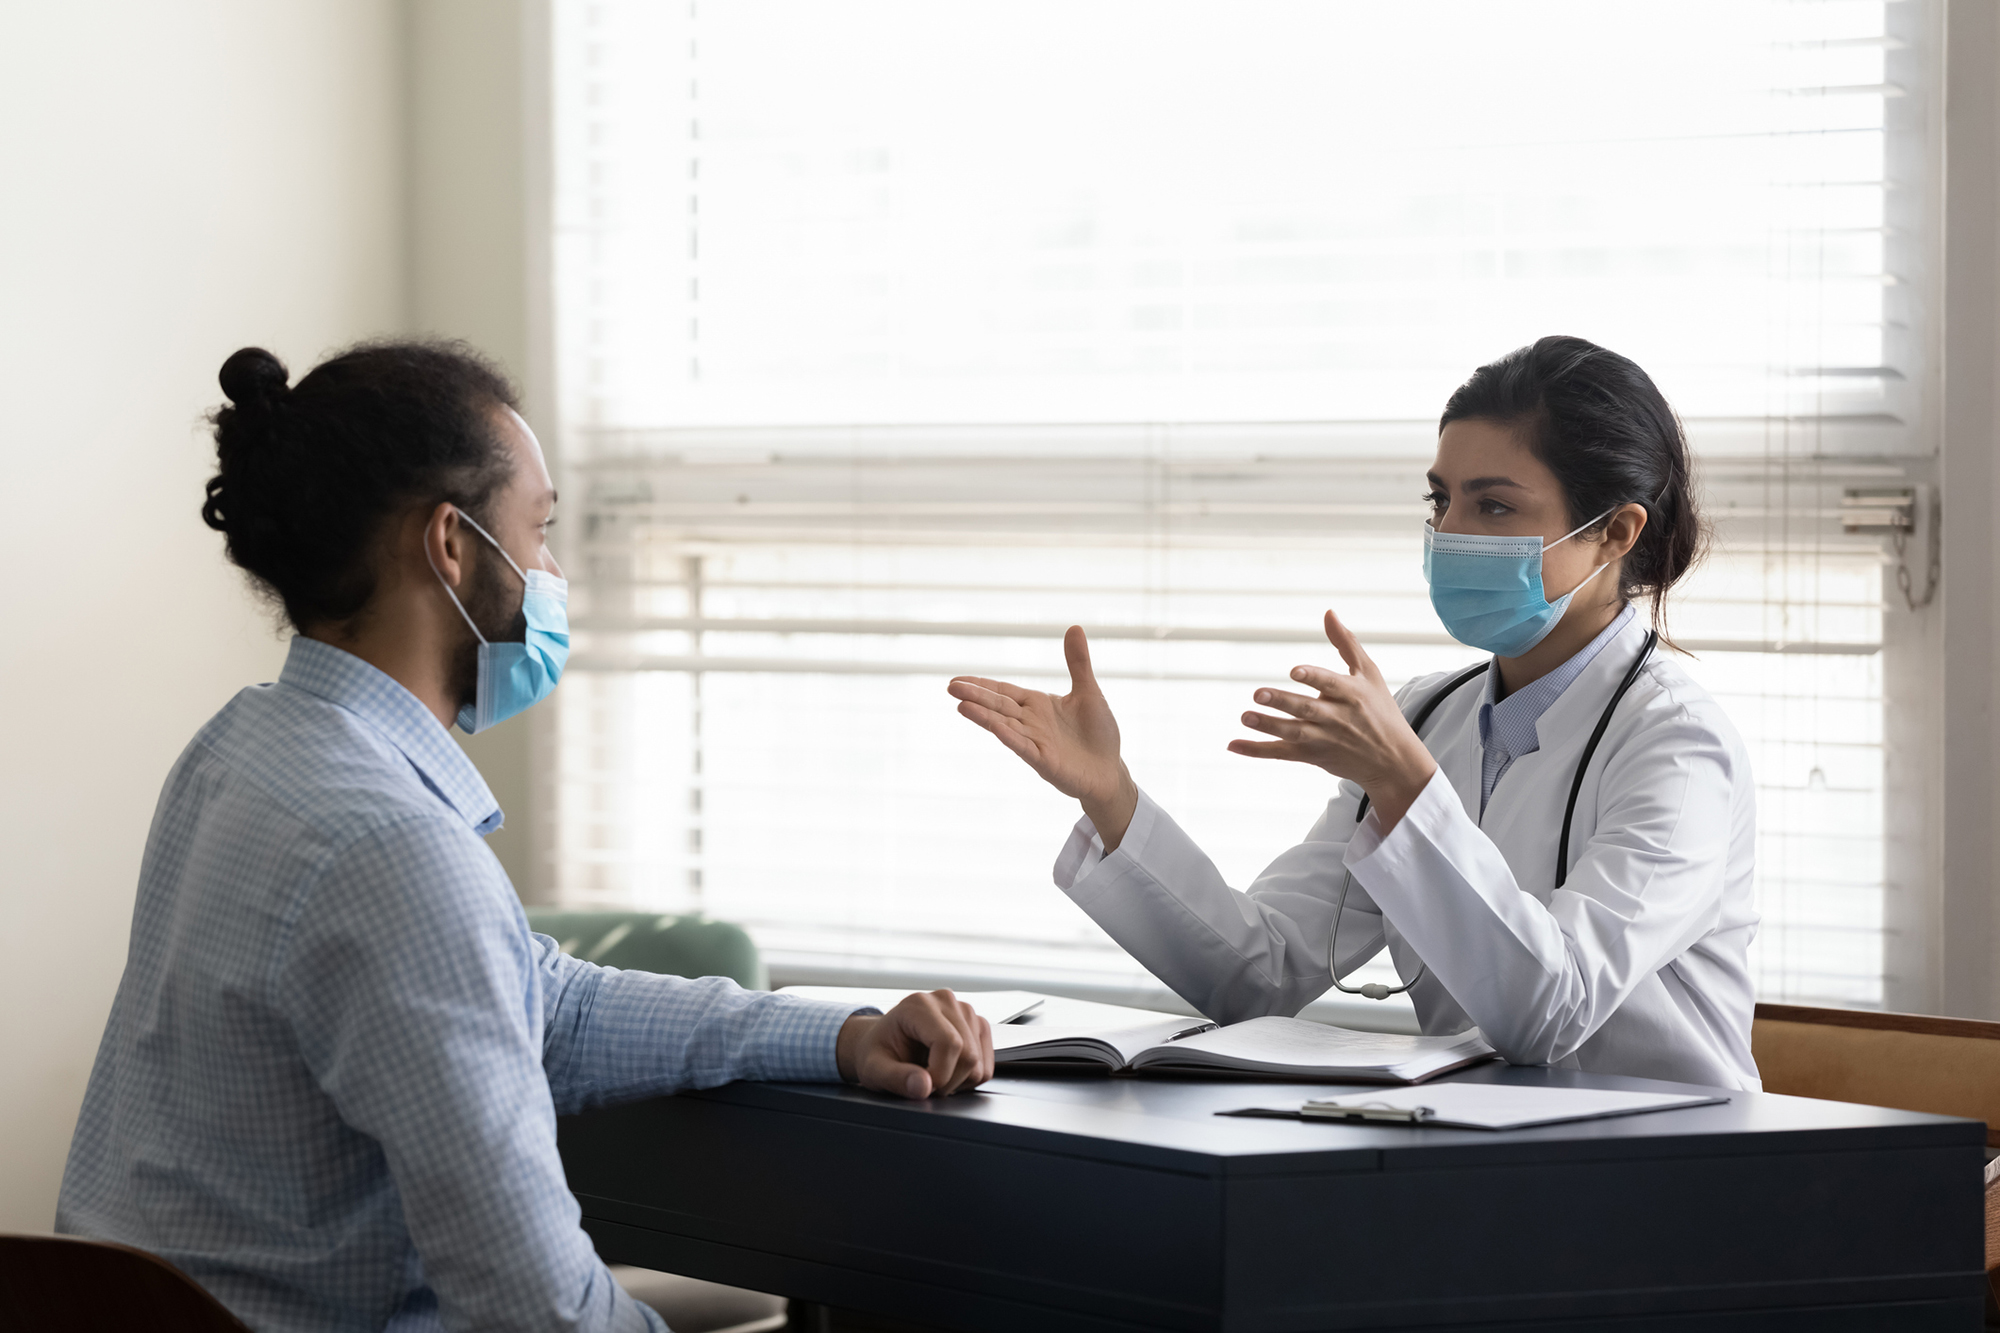 A masked doctor and patient speaking at a desk.